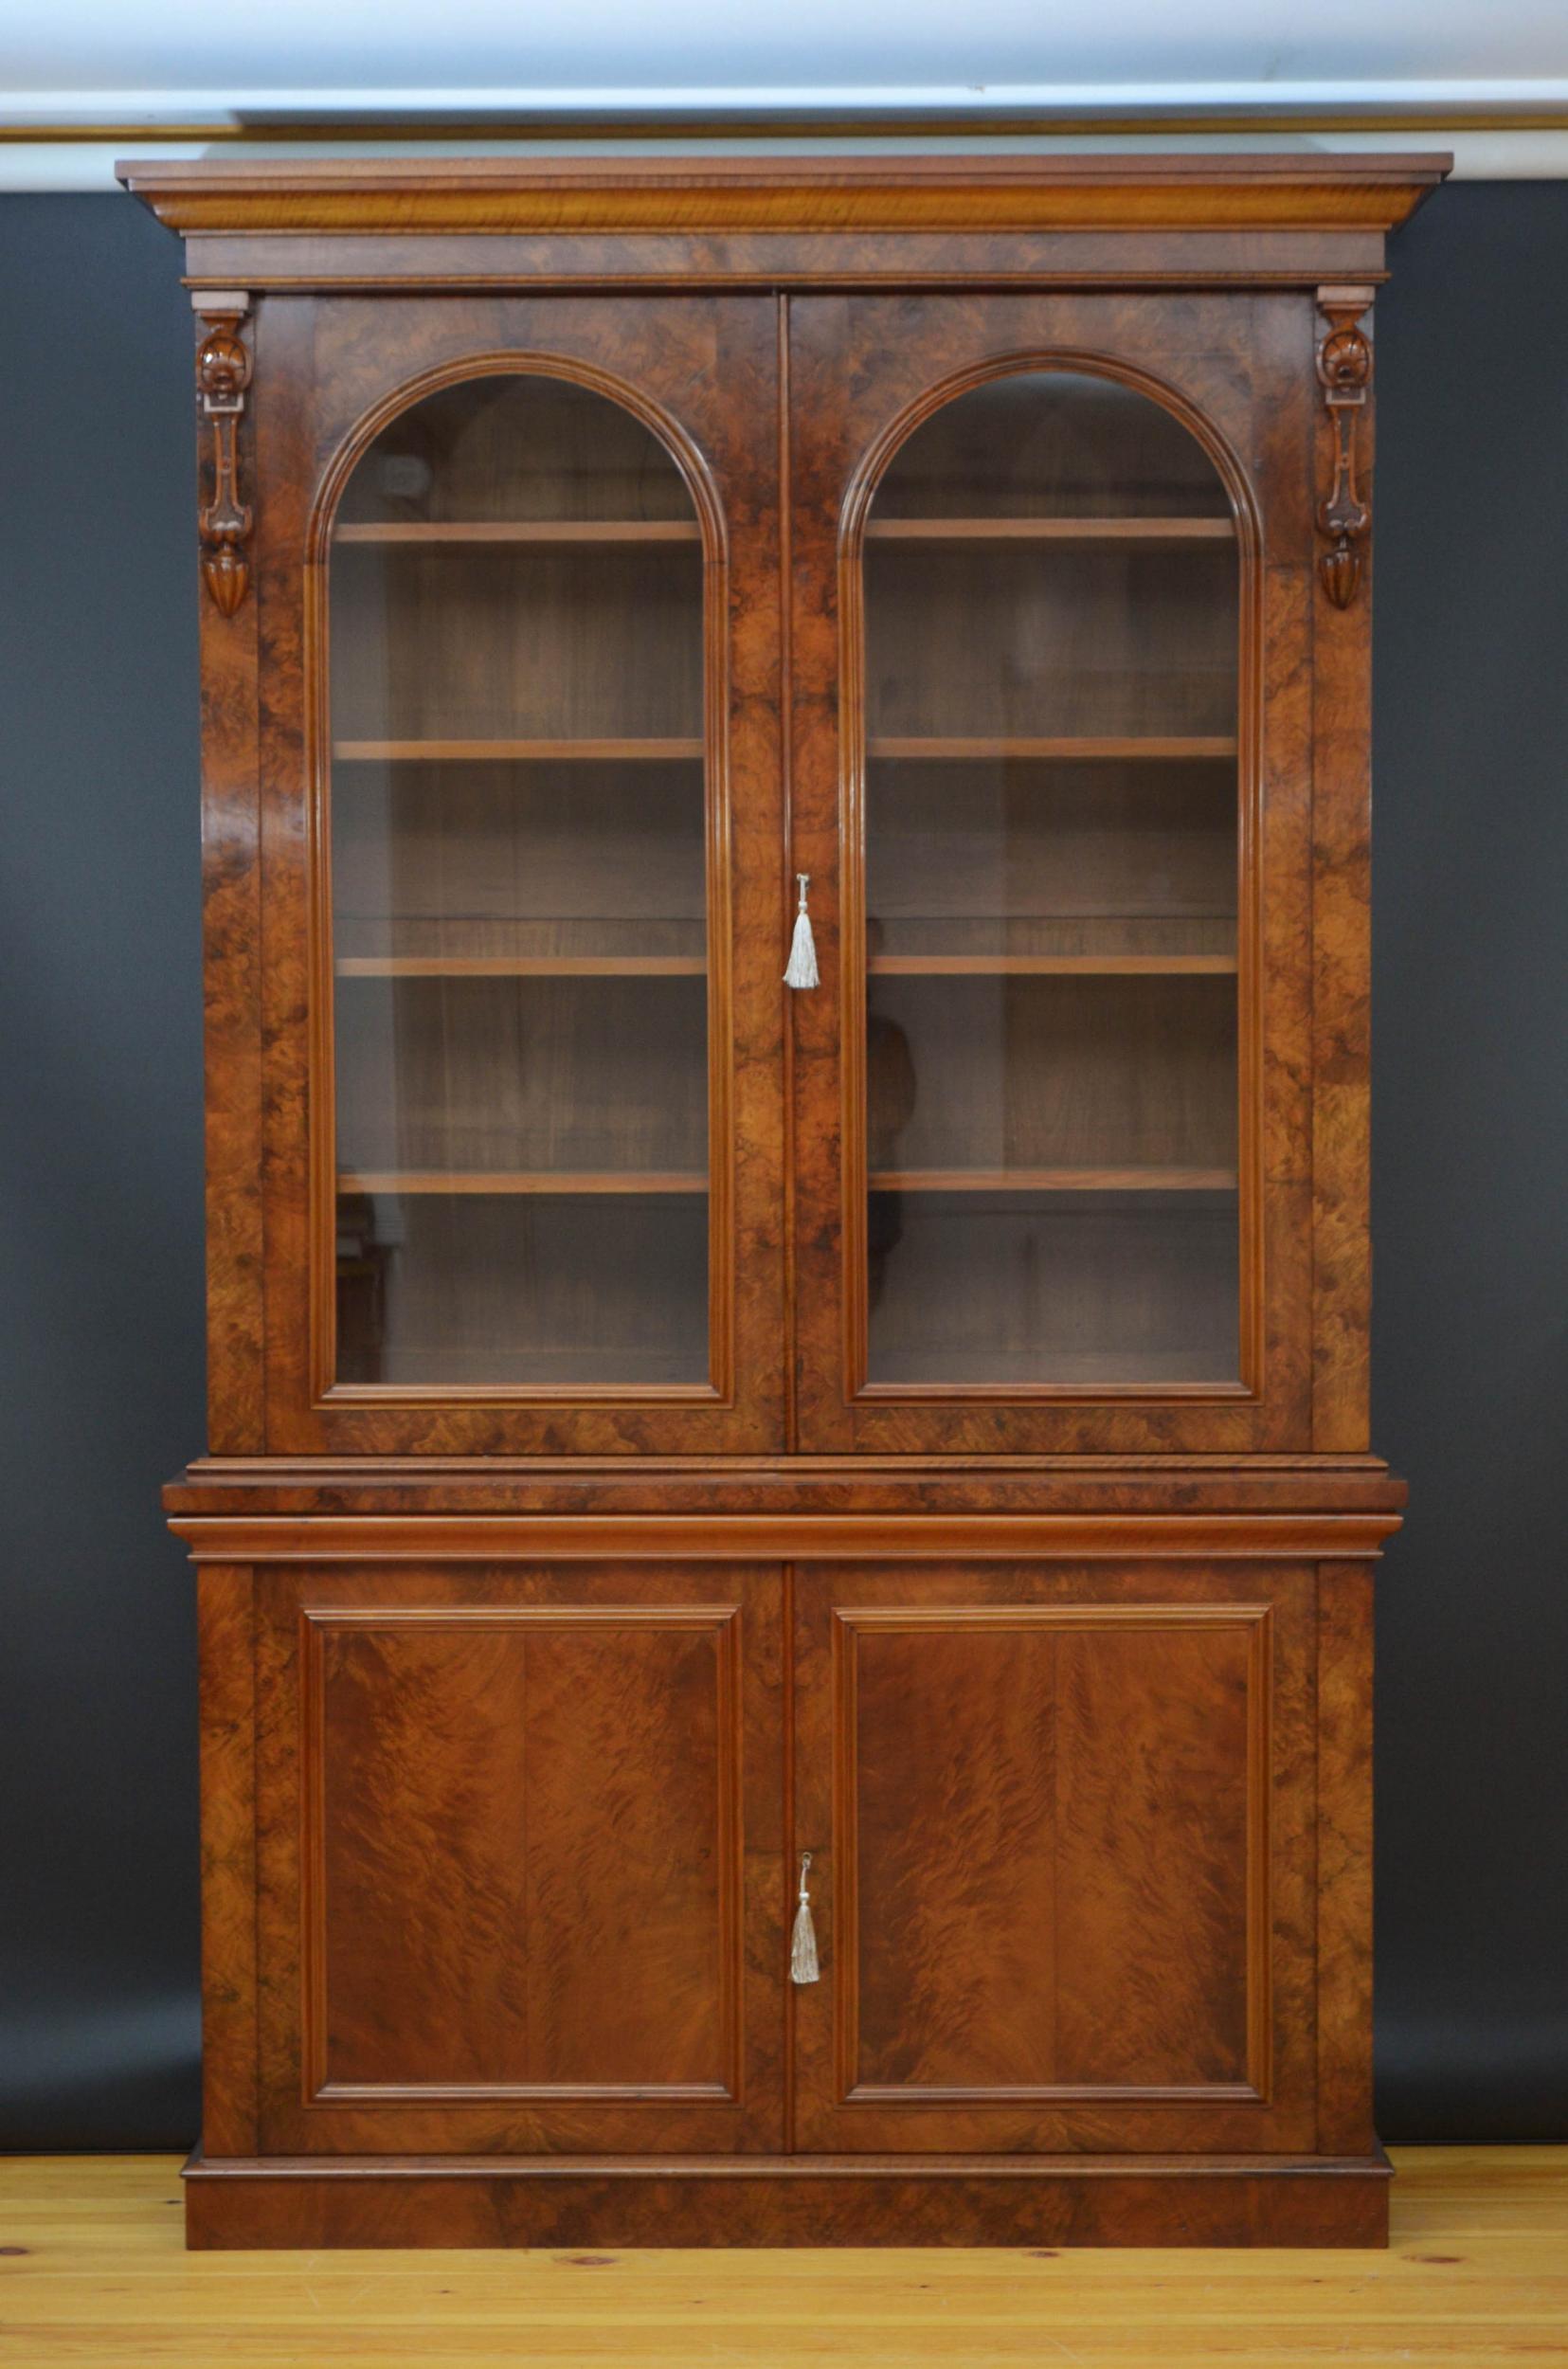 Sn5060 Exceptional Victorian figured walnut bookcase, having outwept cornice above a pair or arched glazed doors enclosing height adjustable shelves and fitted with working lock and a key, all flanked by fine drop carving, projecting base having